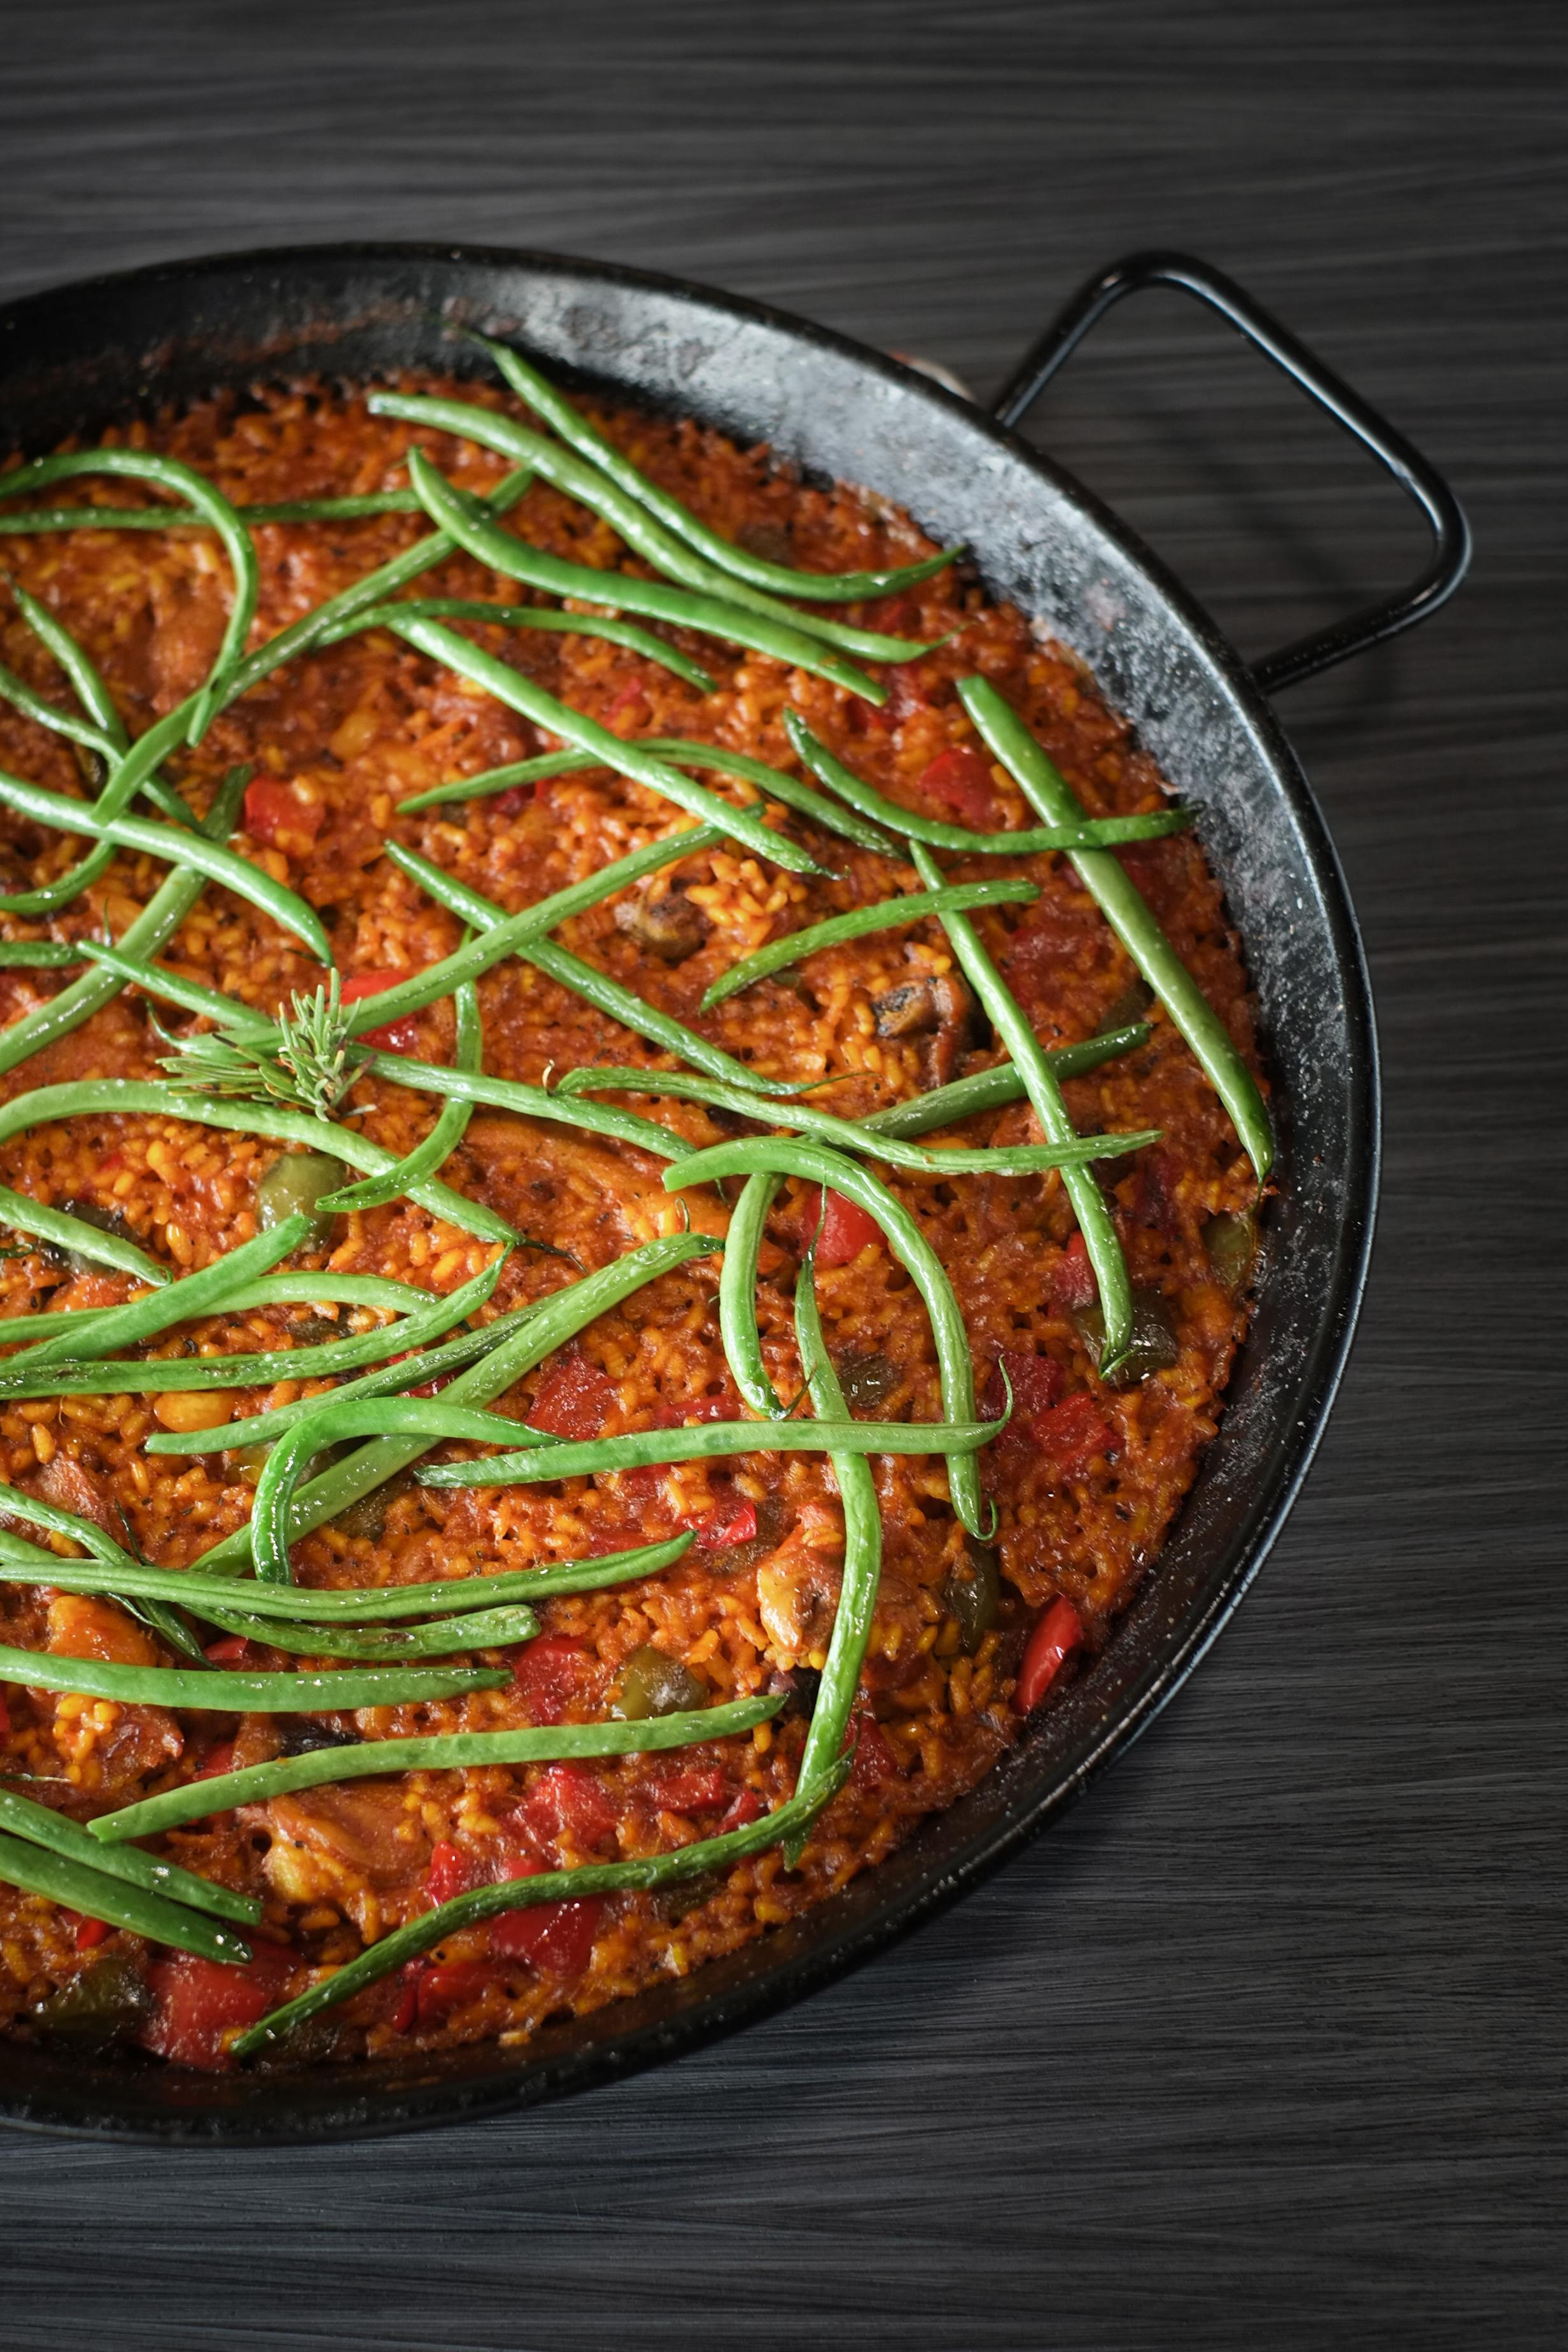 Arrozeria's Paella Valenciana is now available for delivery